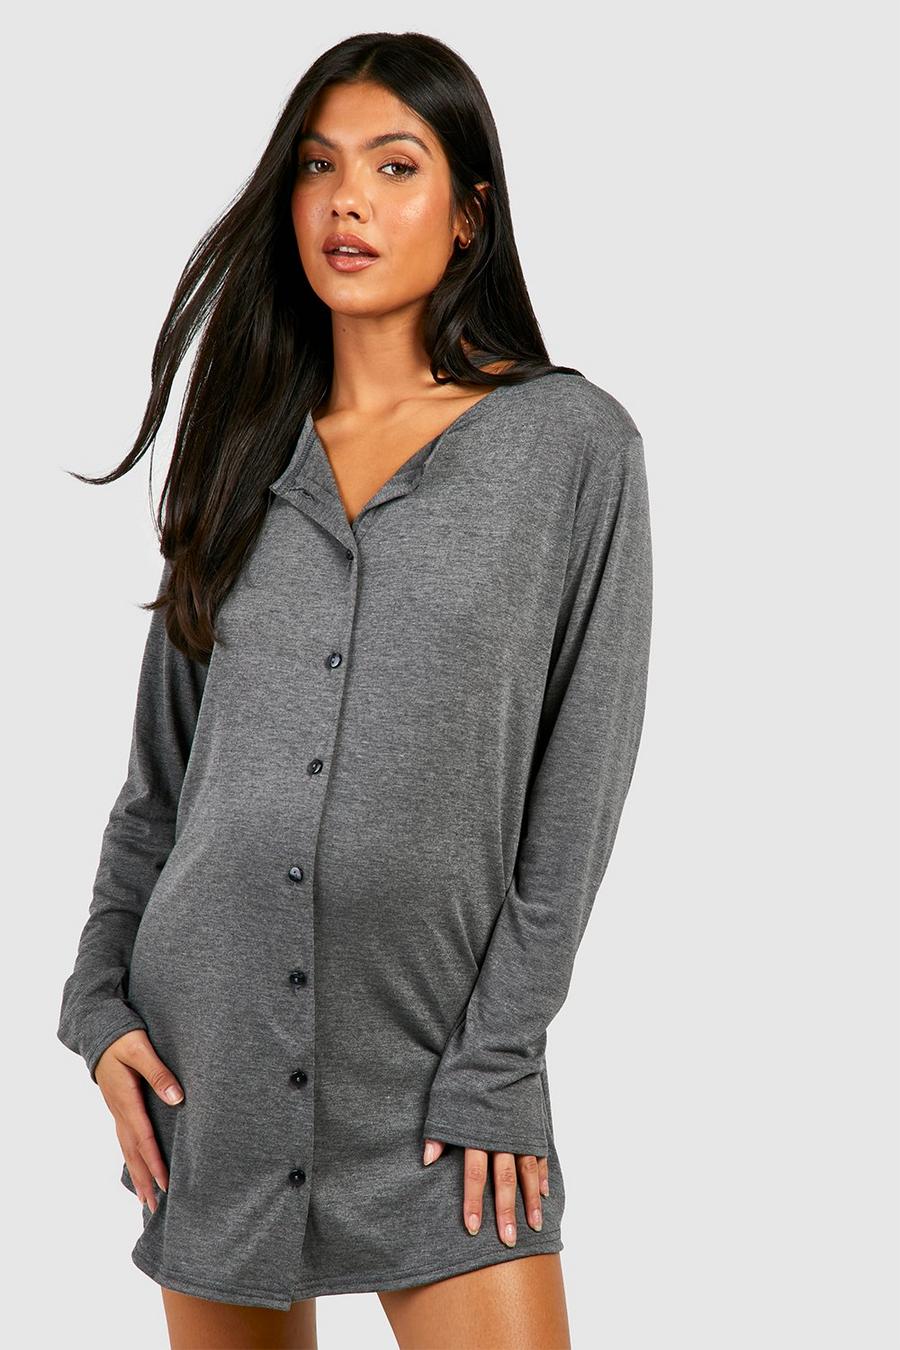 Charcoal grey Maternity Long Sleeve Peached Jersey Button Down Nightie